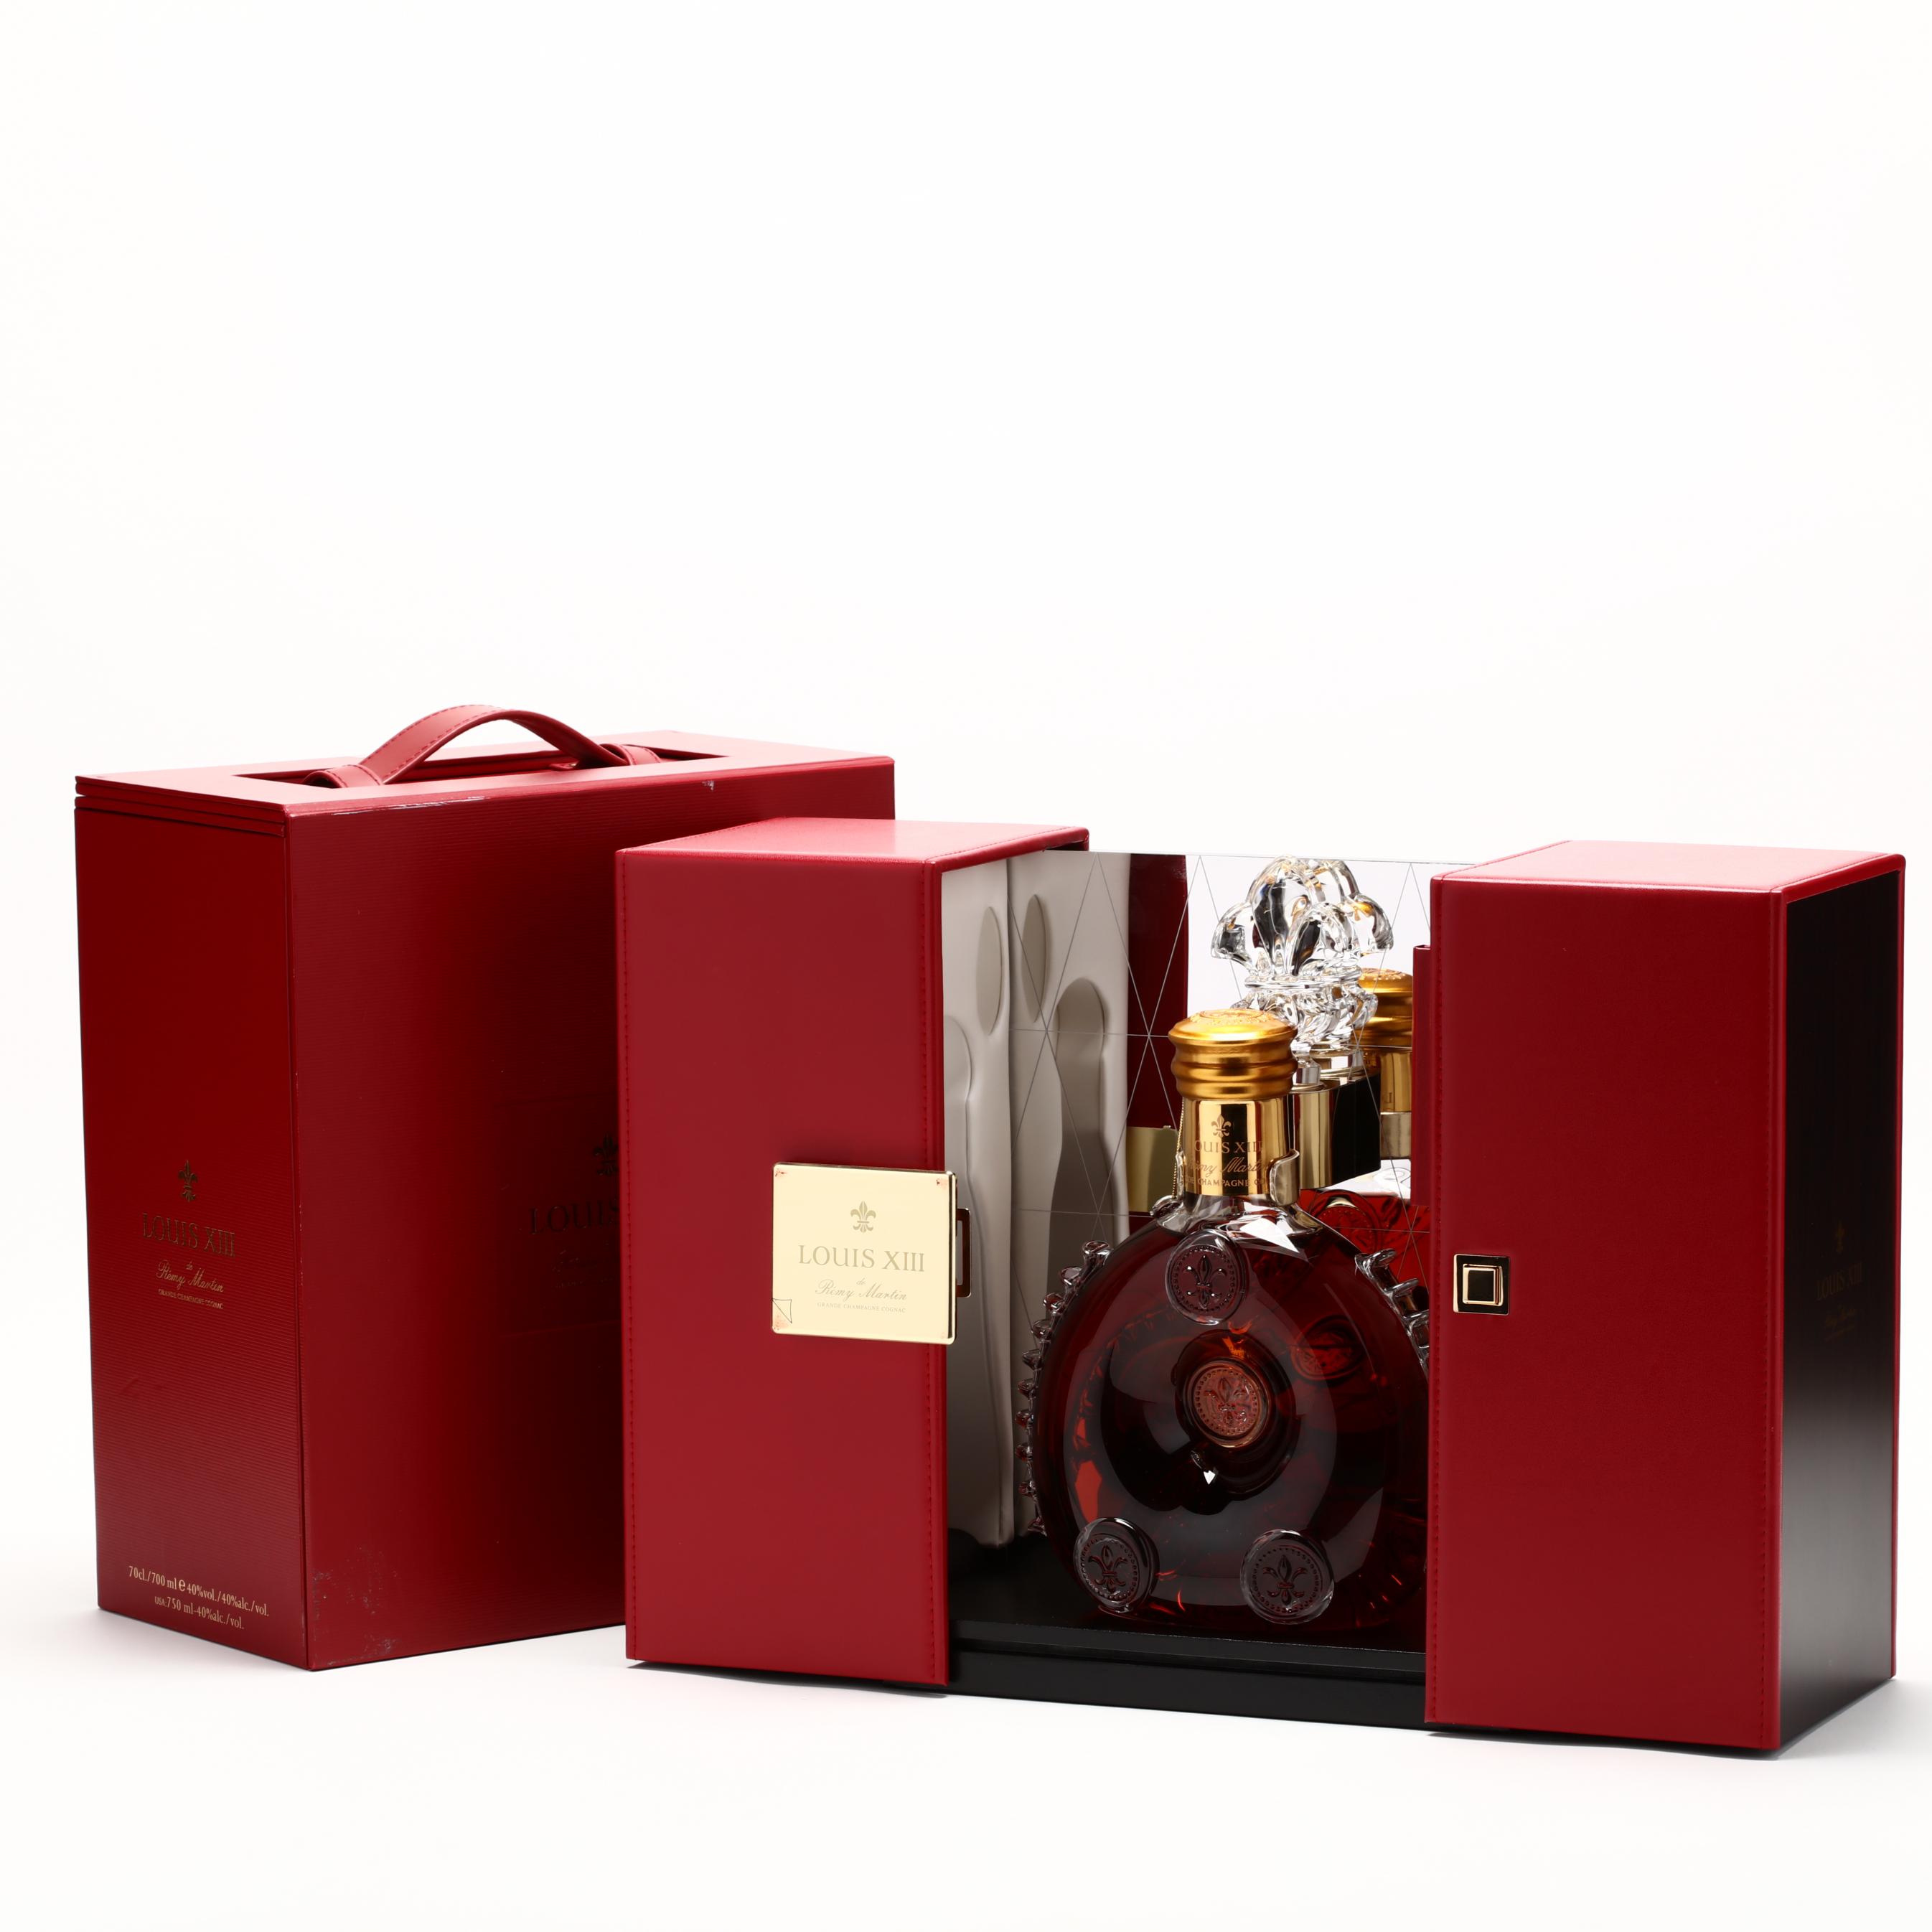 At Auction: Remy Martin, Remy Martin Louis XIII and Baccarat Bottle SEALED